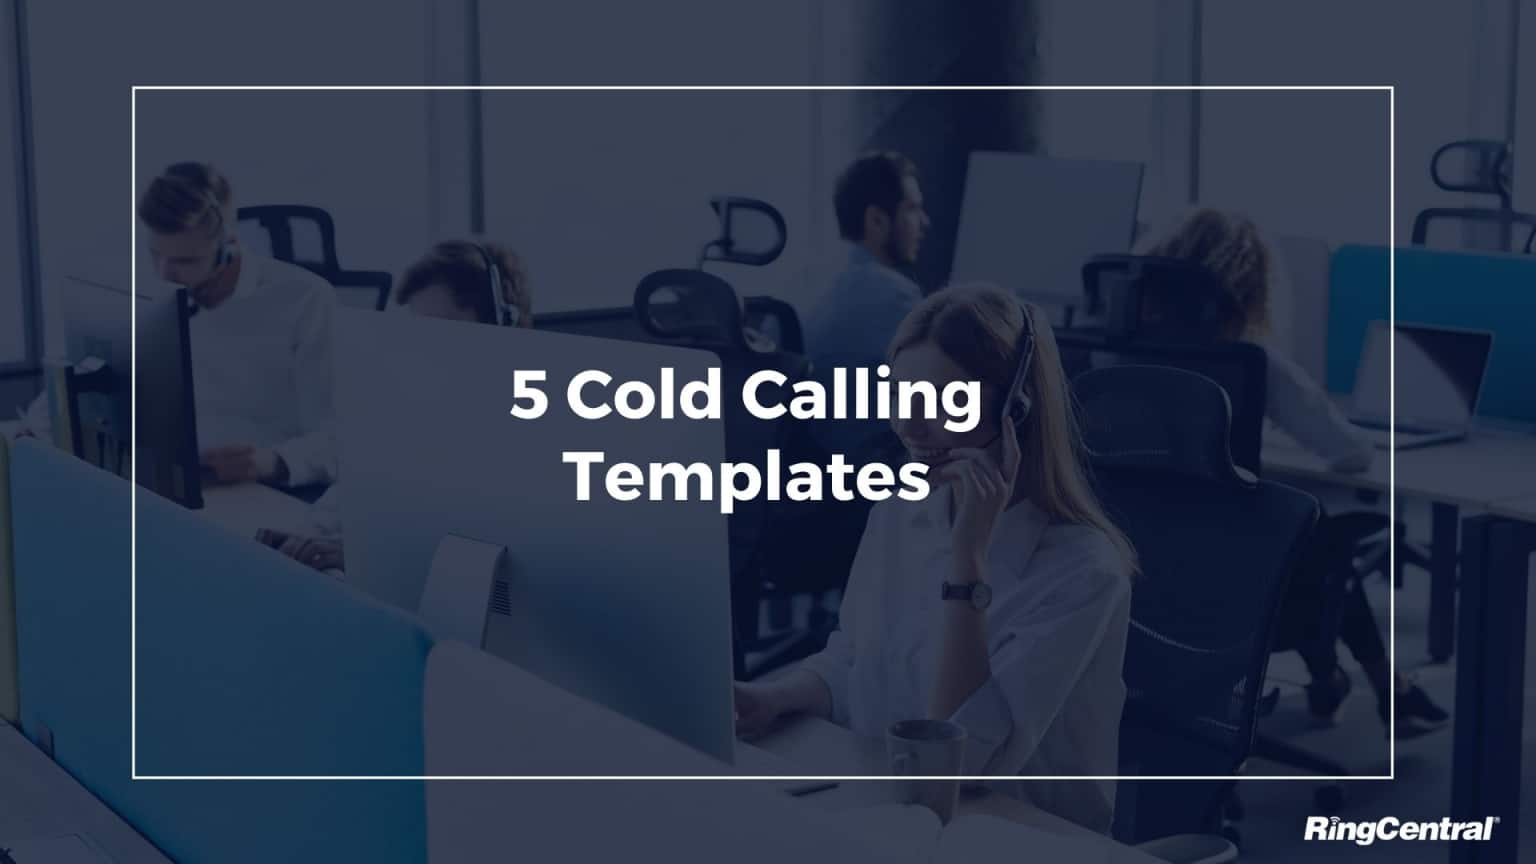 5 Cold Calling Templates you can use